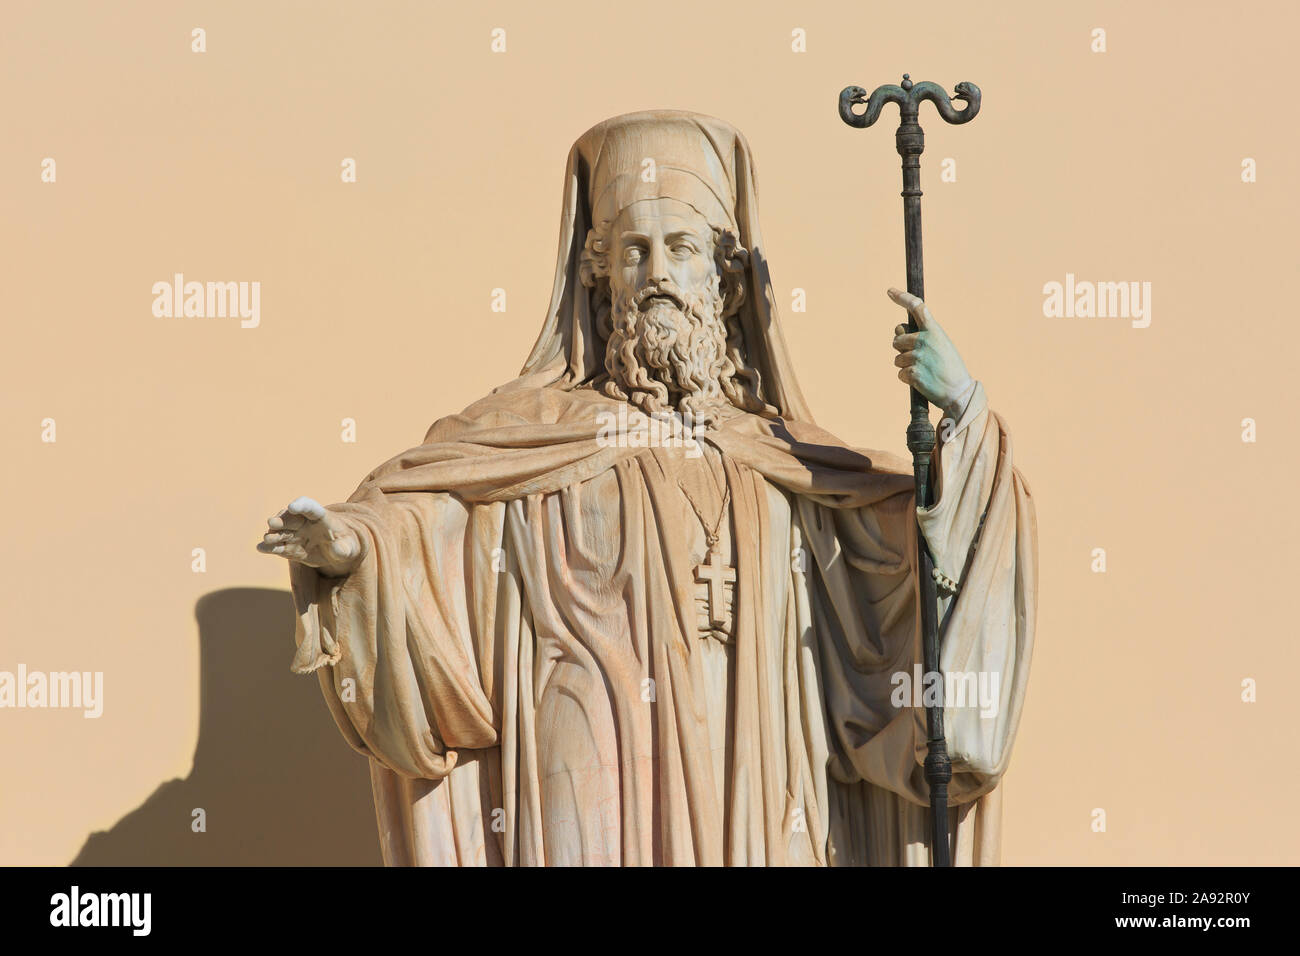 Statue of the Ecumenical Patriarch (Archbishop) of Constantinople Gregory V of Constantinople (1746-1821) outside the University in Athens, Greece Stock Photo